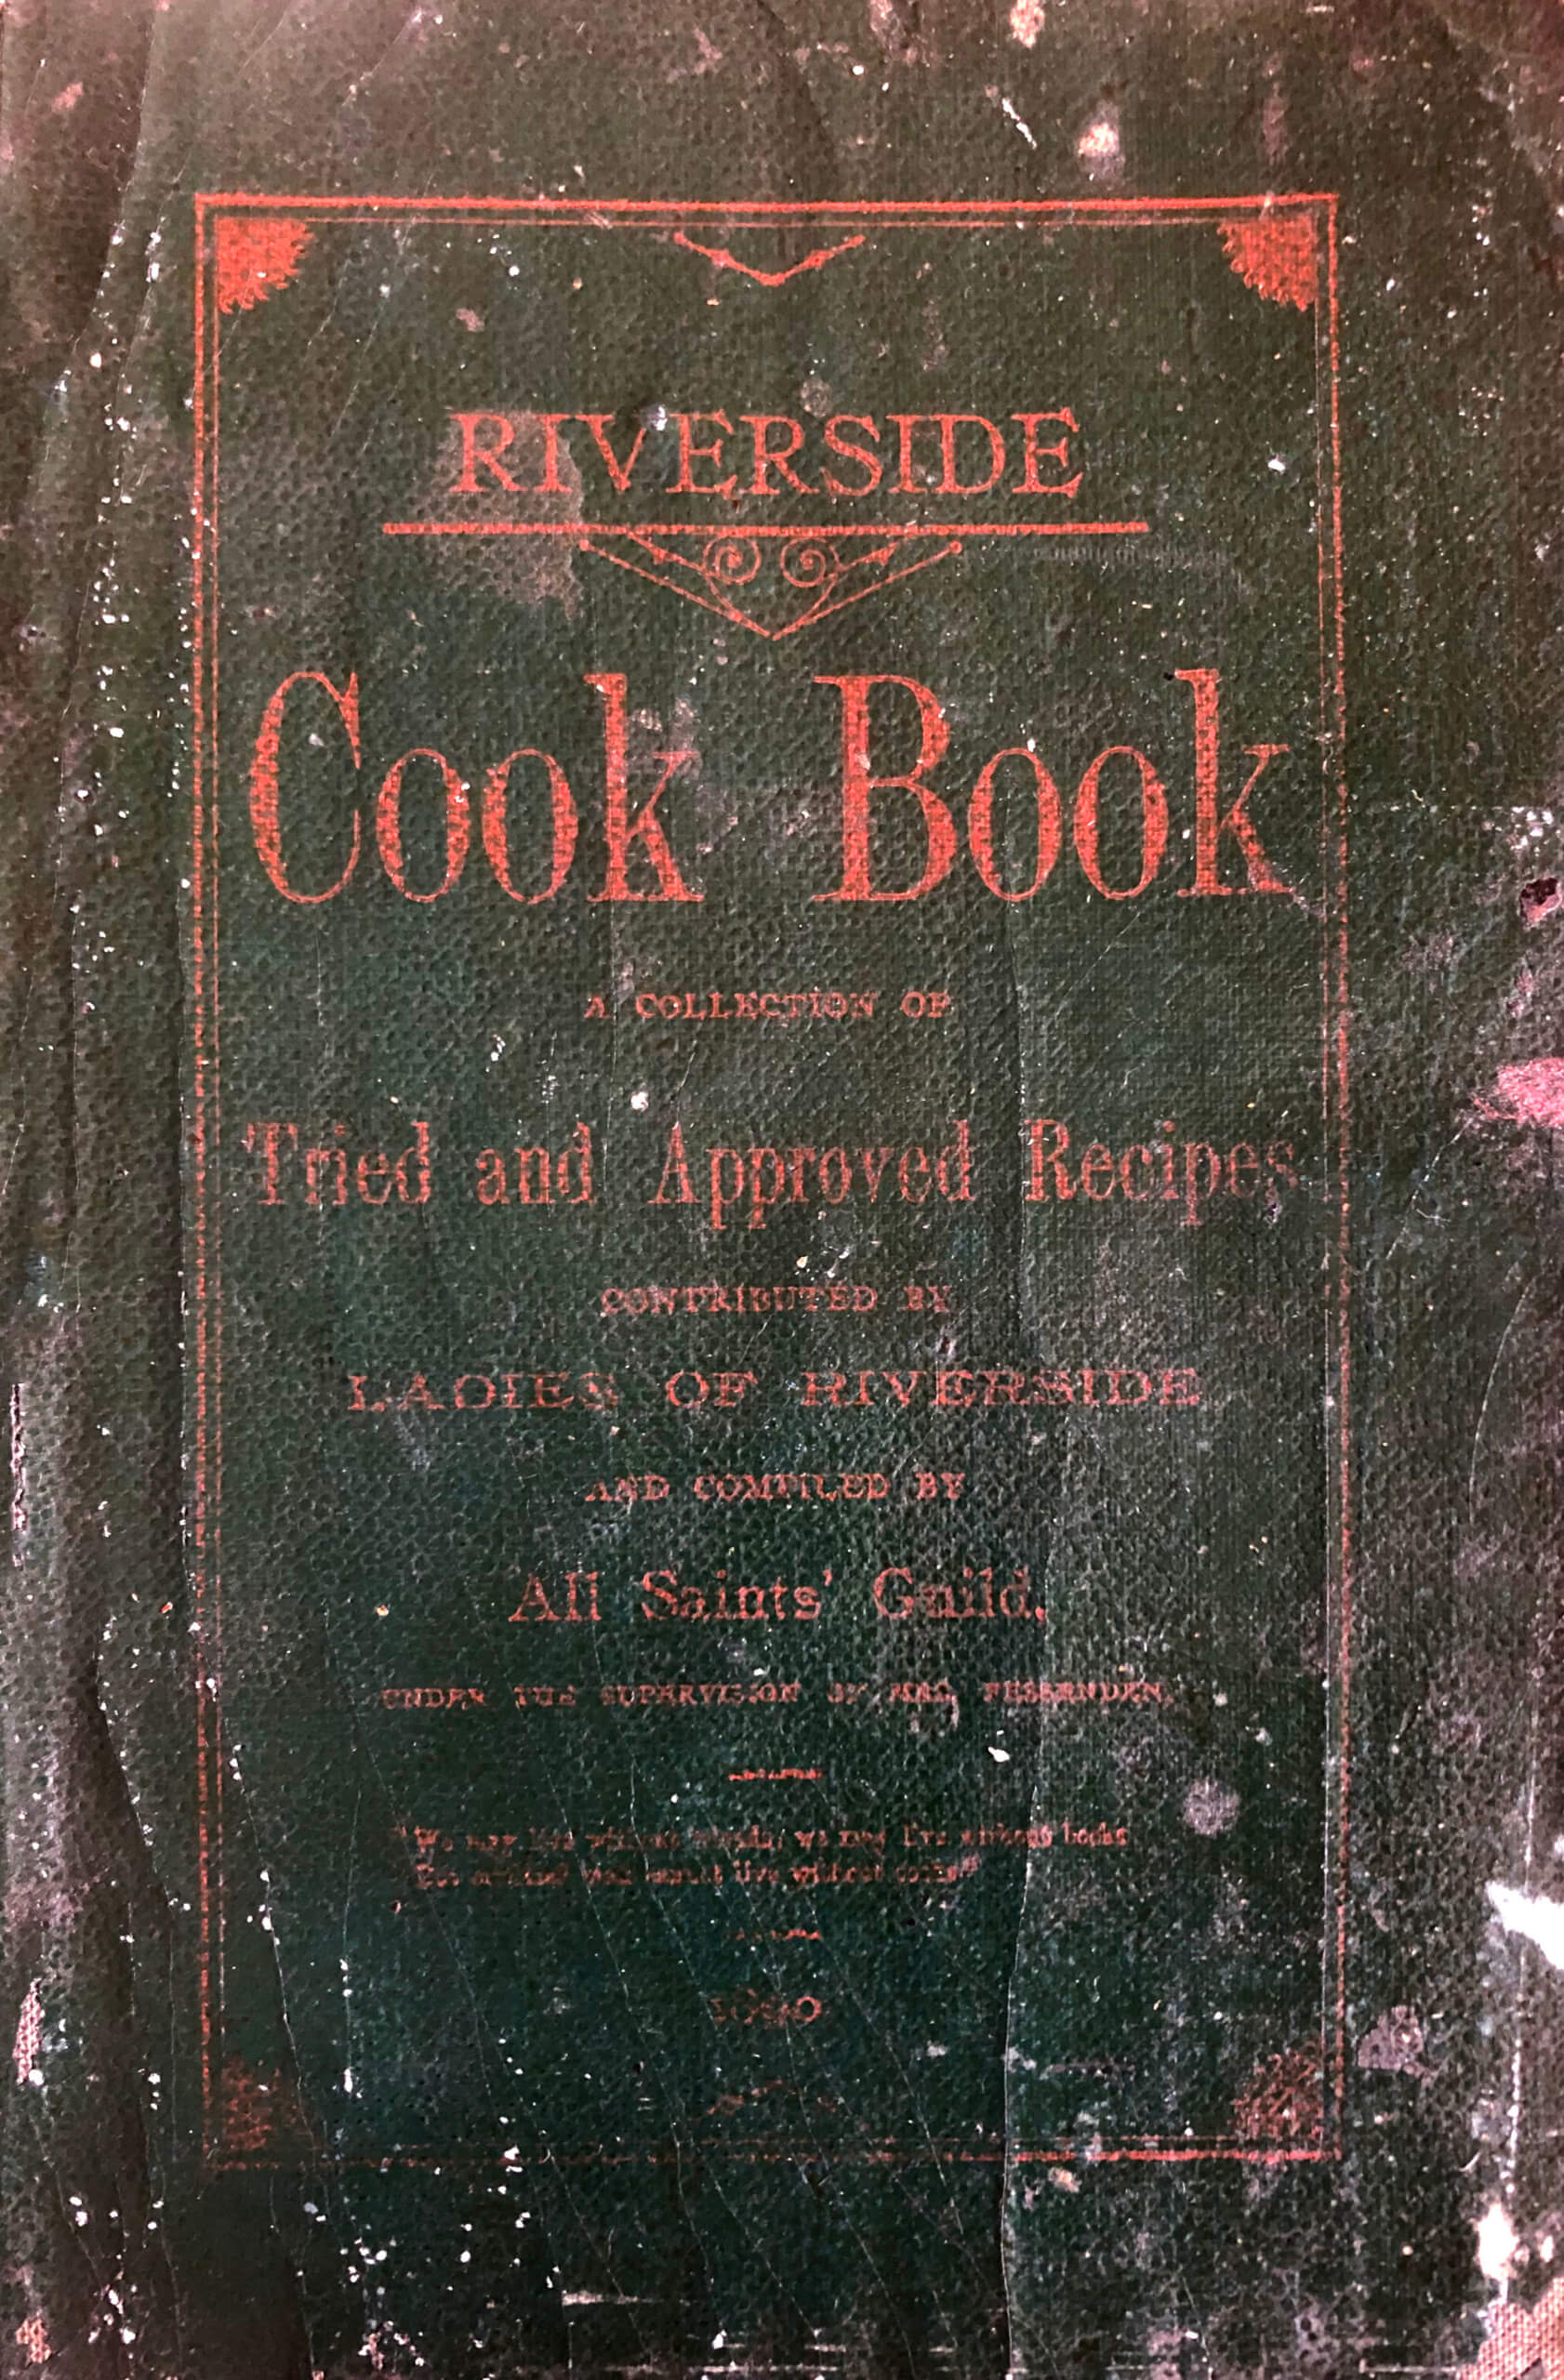 Cover of the All Saints' Guild of Riverside Cook Book